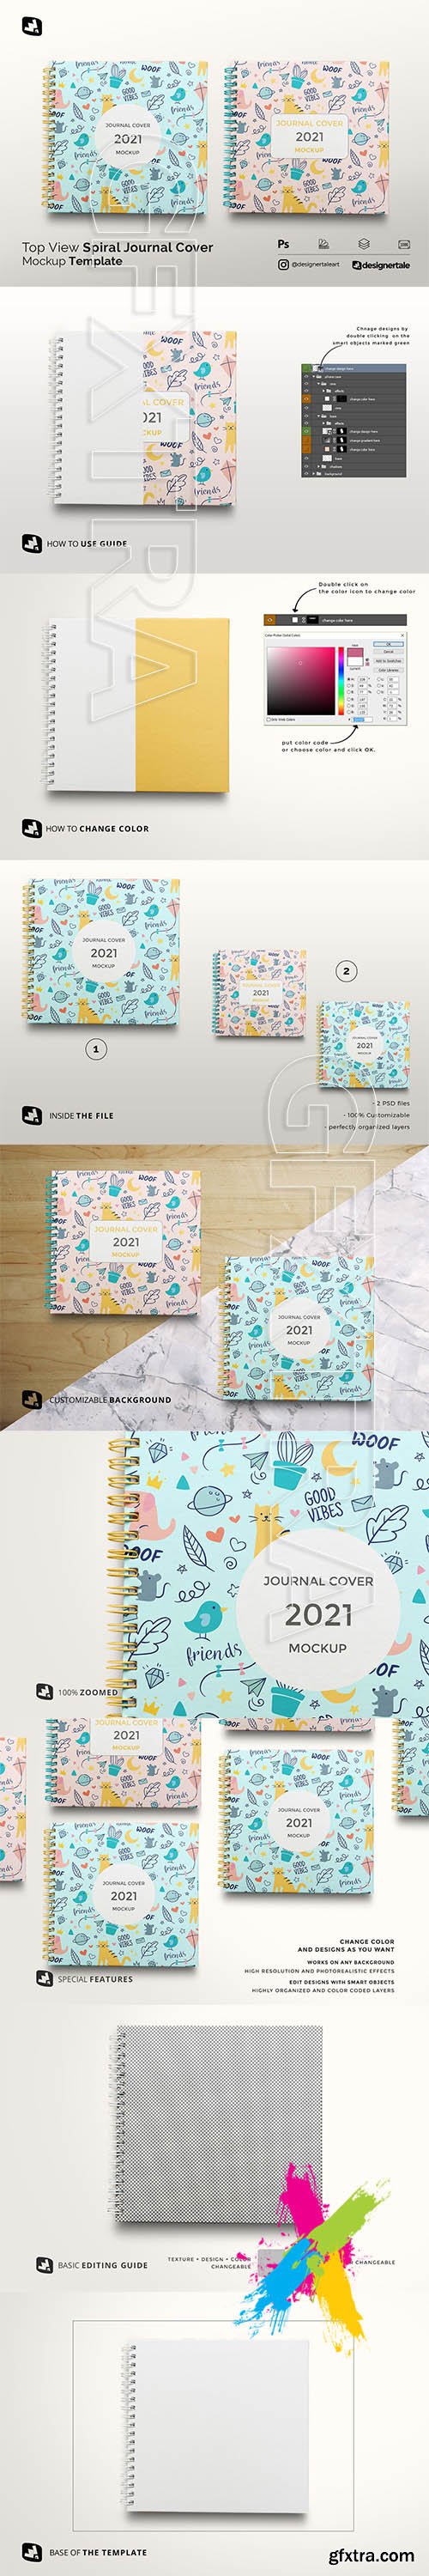 CreativeMarket - Top View Spiral Journal Cover Mockup 5308815